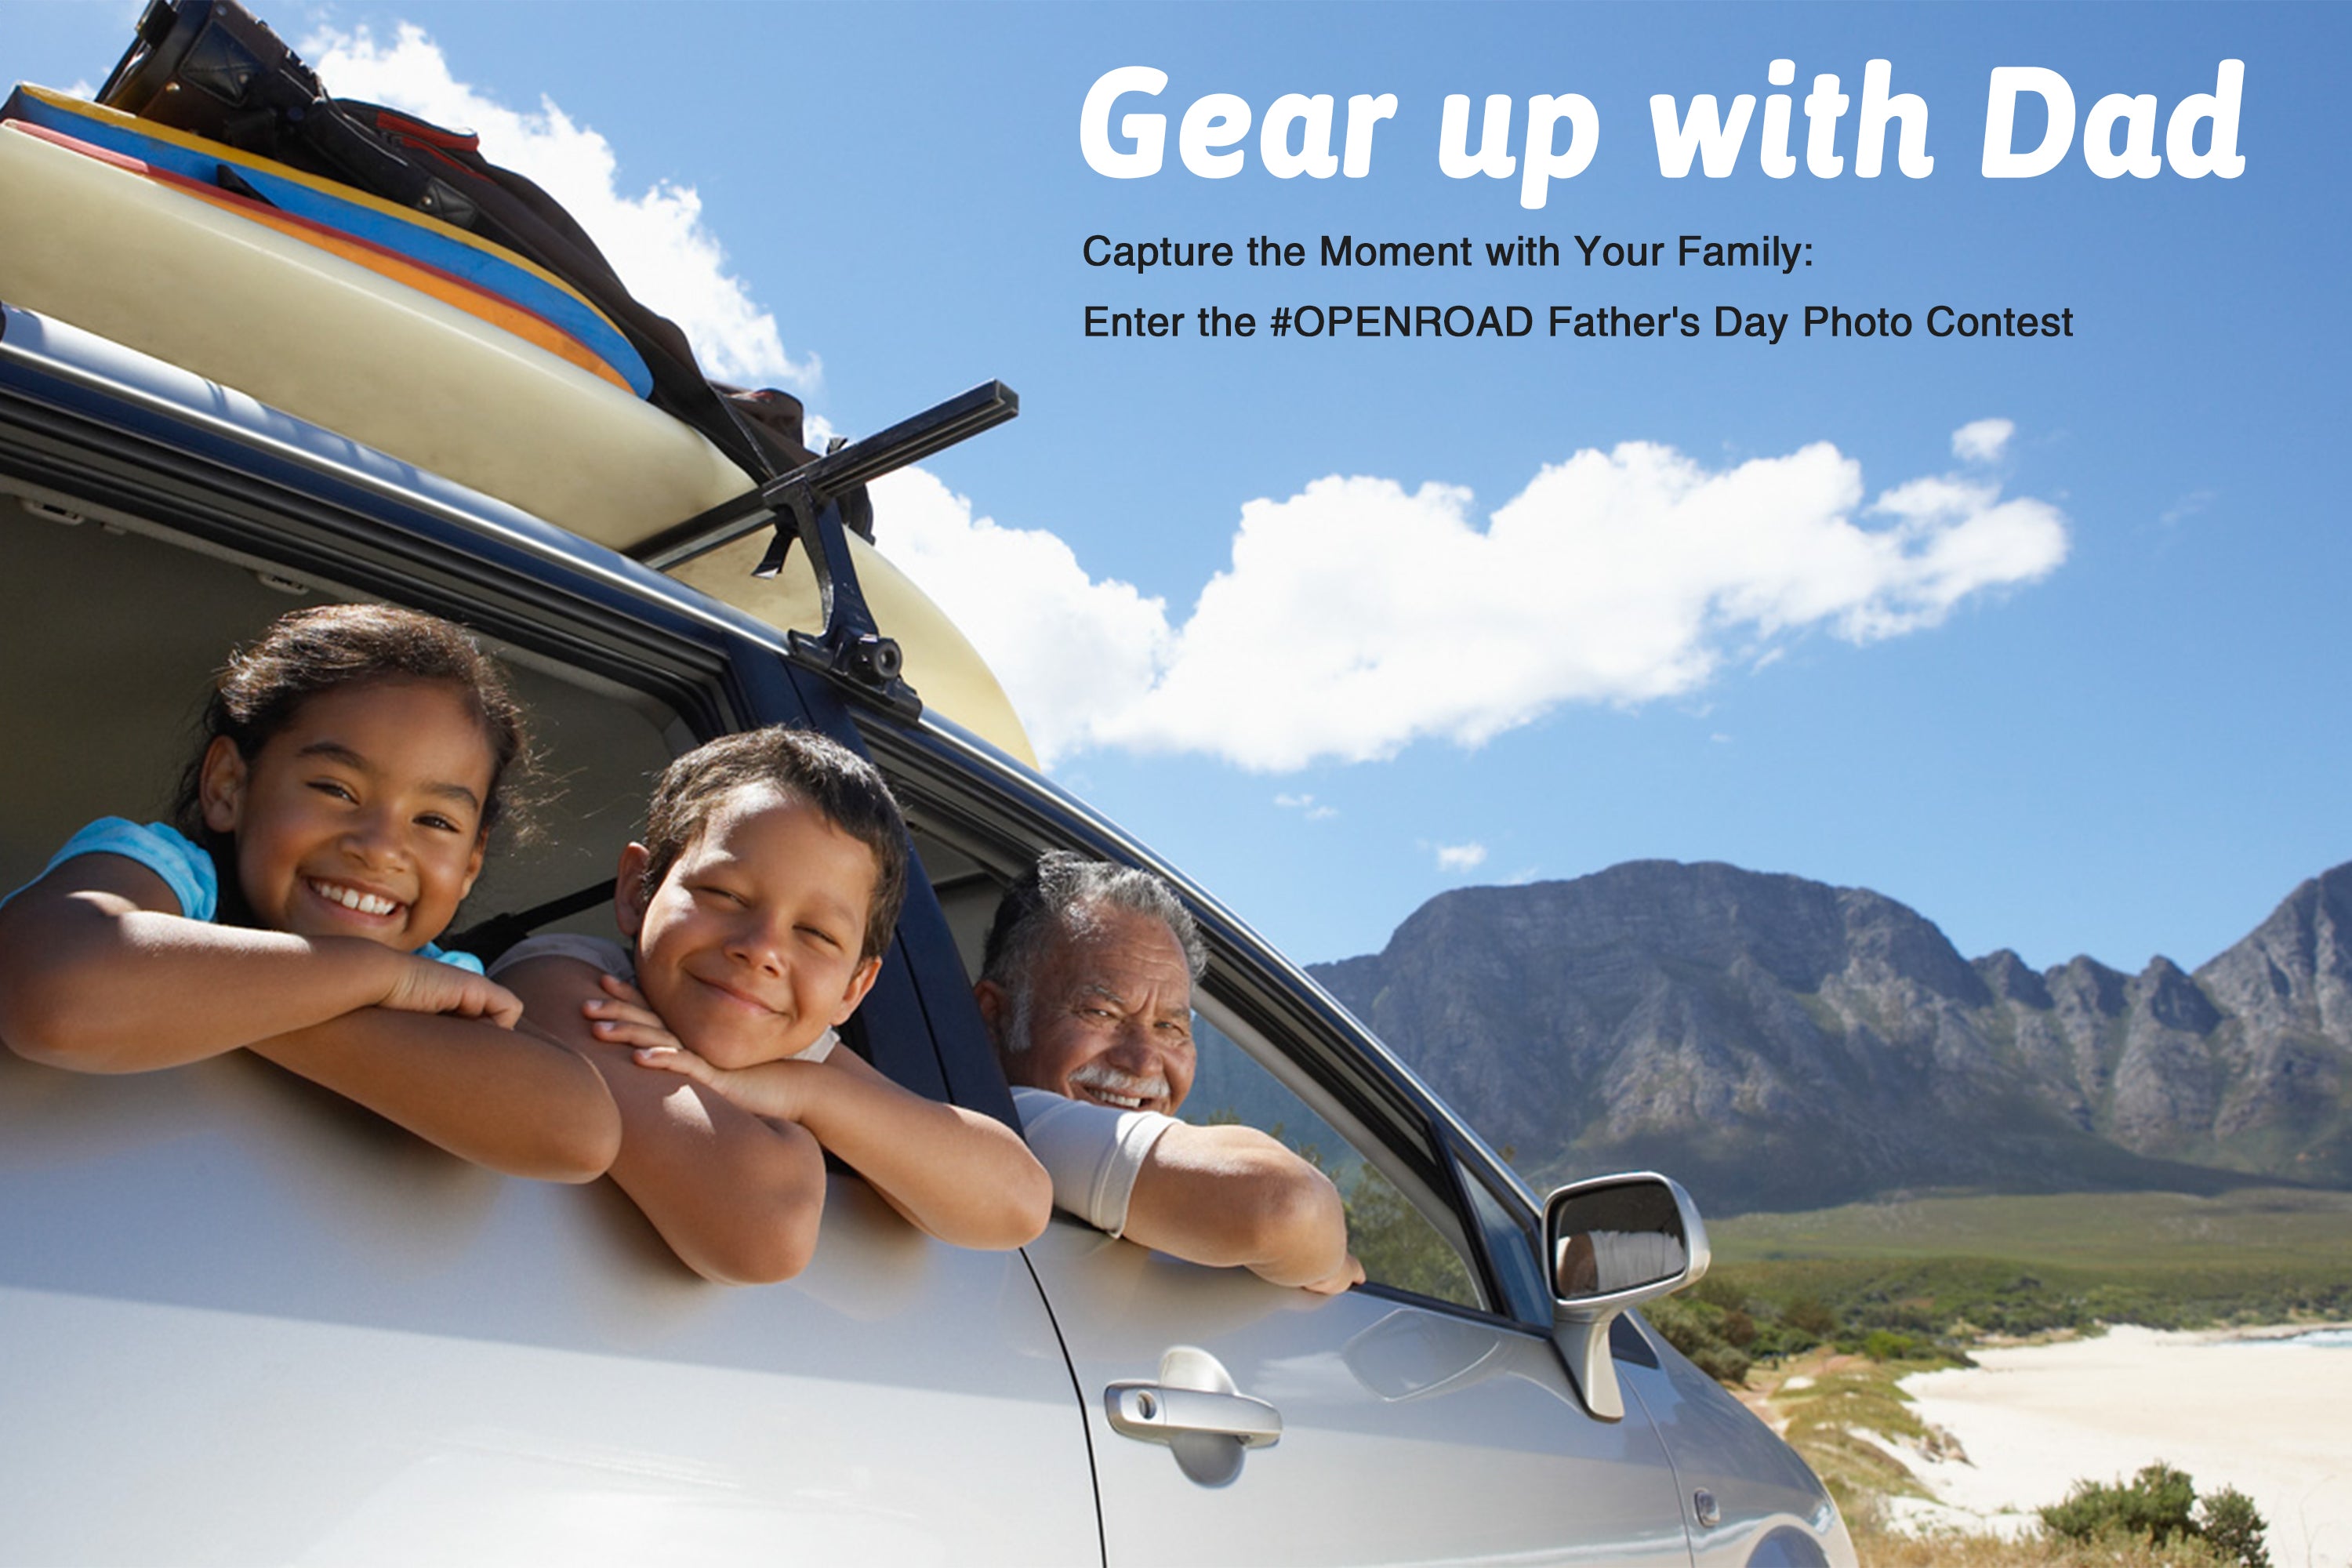 Join the OPENROAD Father's Day Photo Contest and Win Off-Road LED Lights: Don't Forget to Tag Us When You Receive Your Prize!